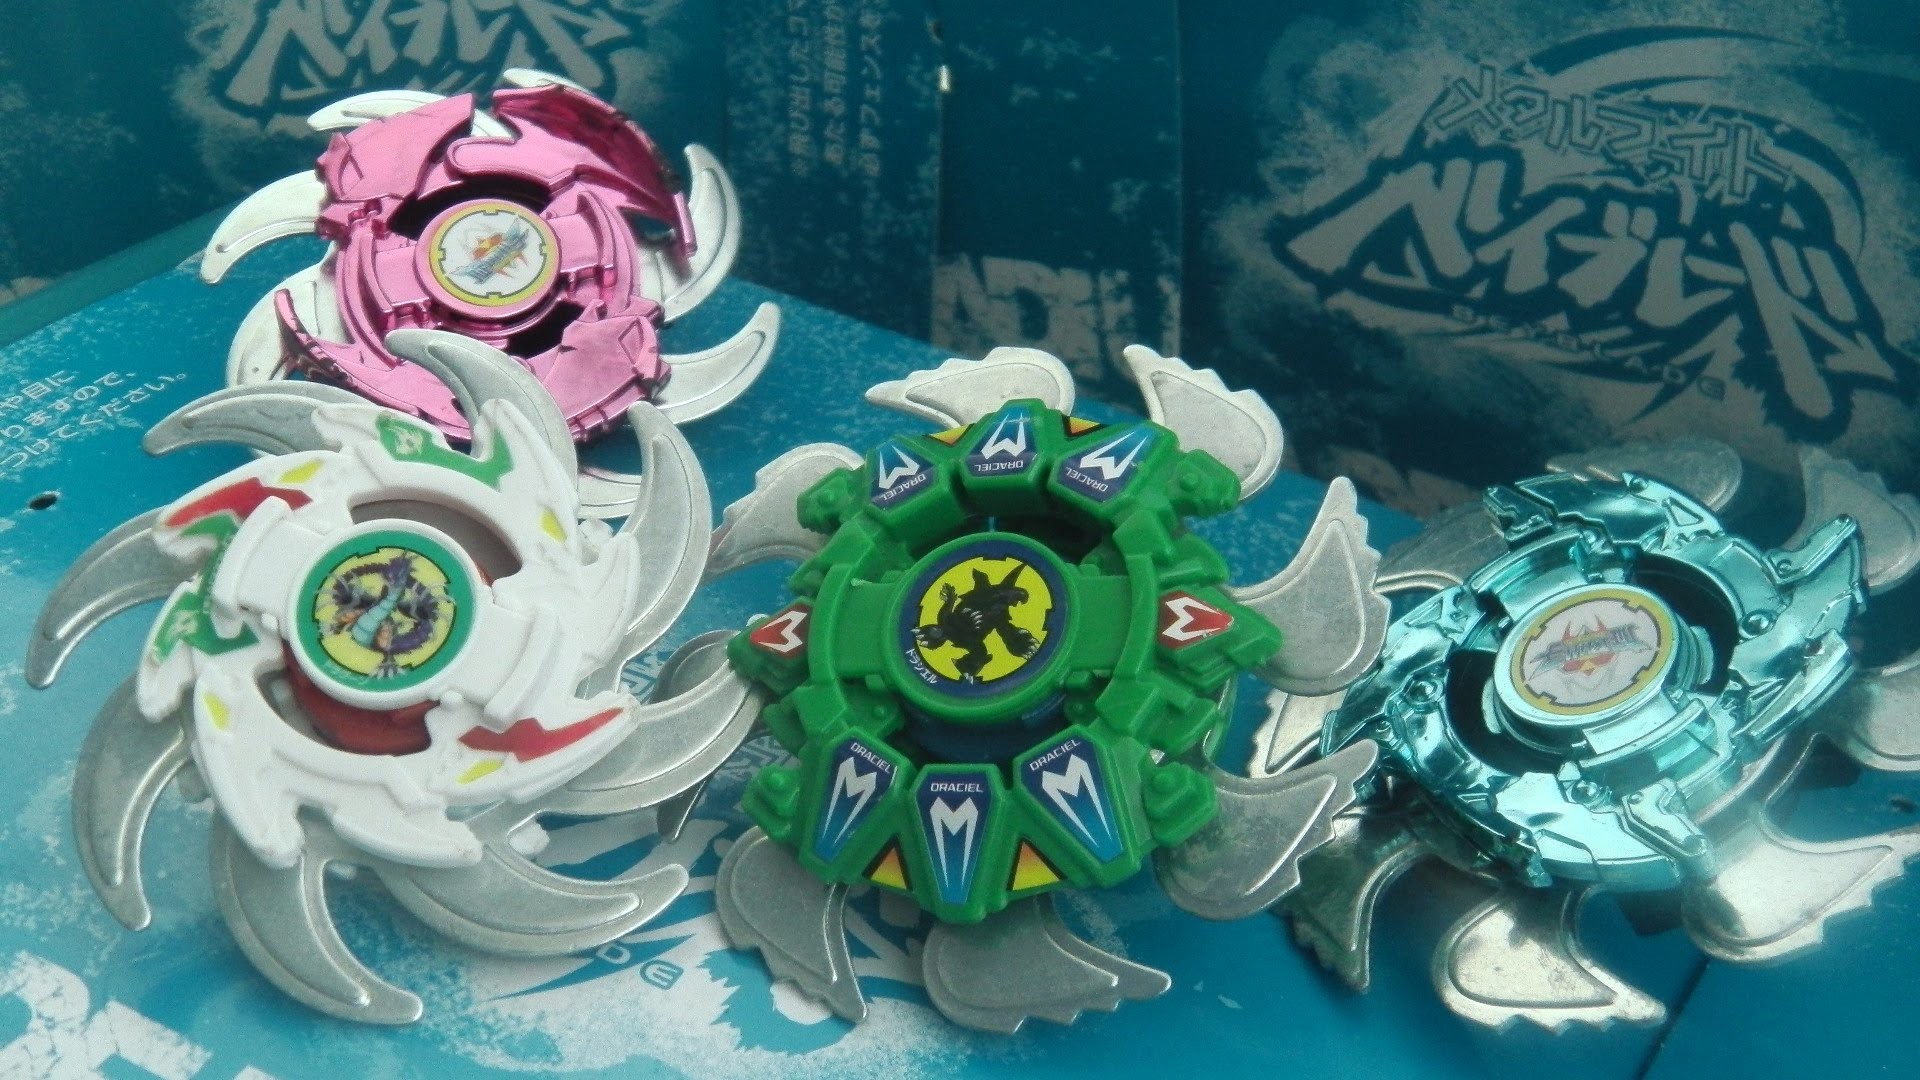 1920x1080 Spin Heat Weight Disks on Old Generation Beyblades - GEARED SHURIKENS? -  YouTube